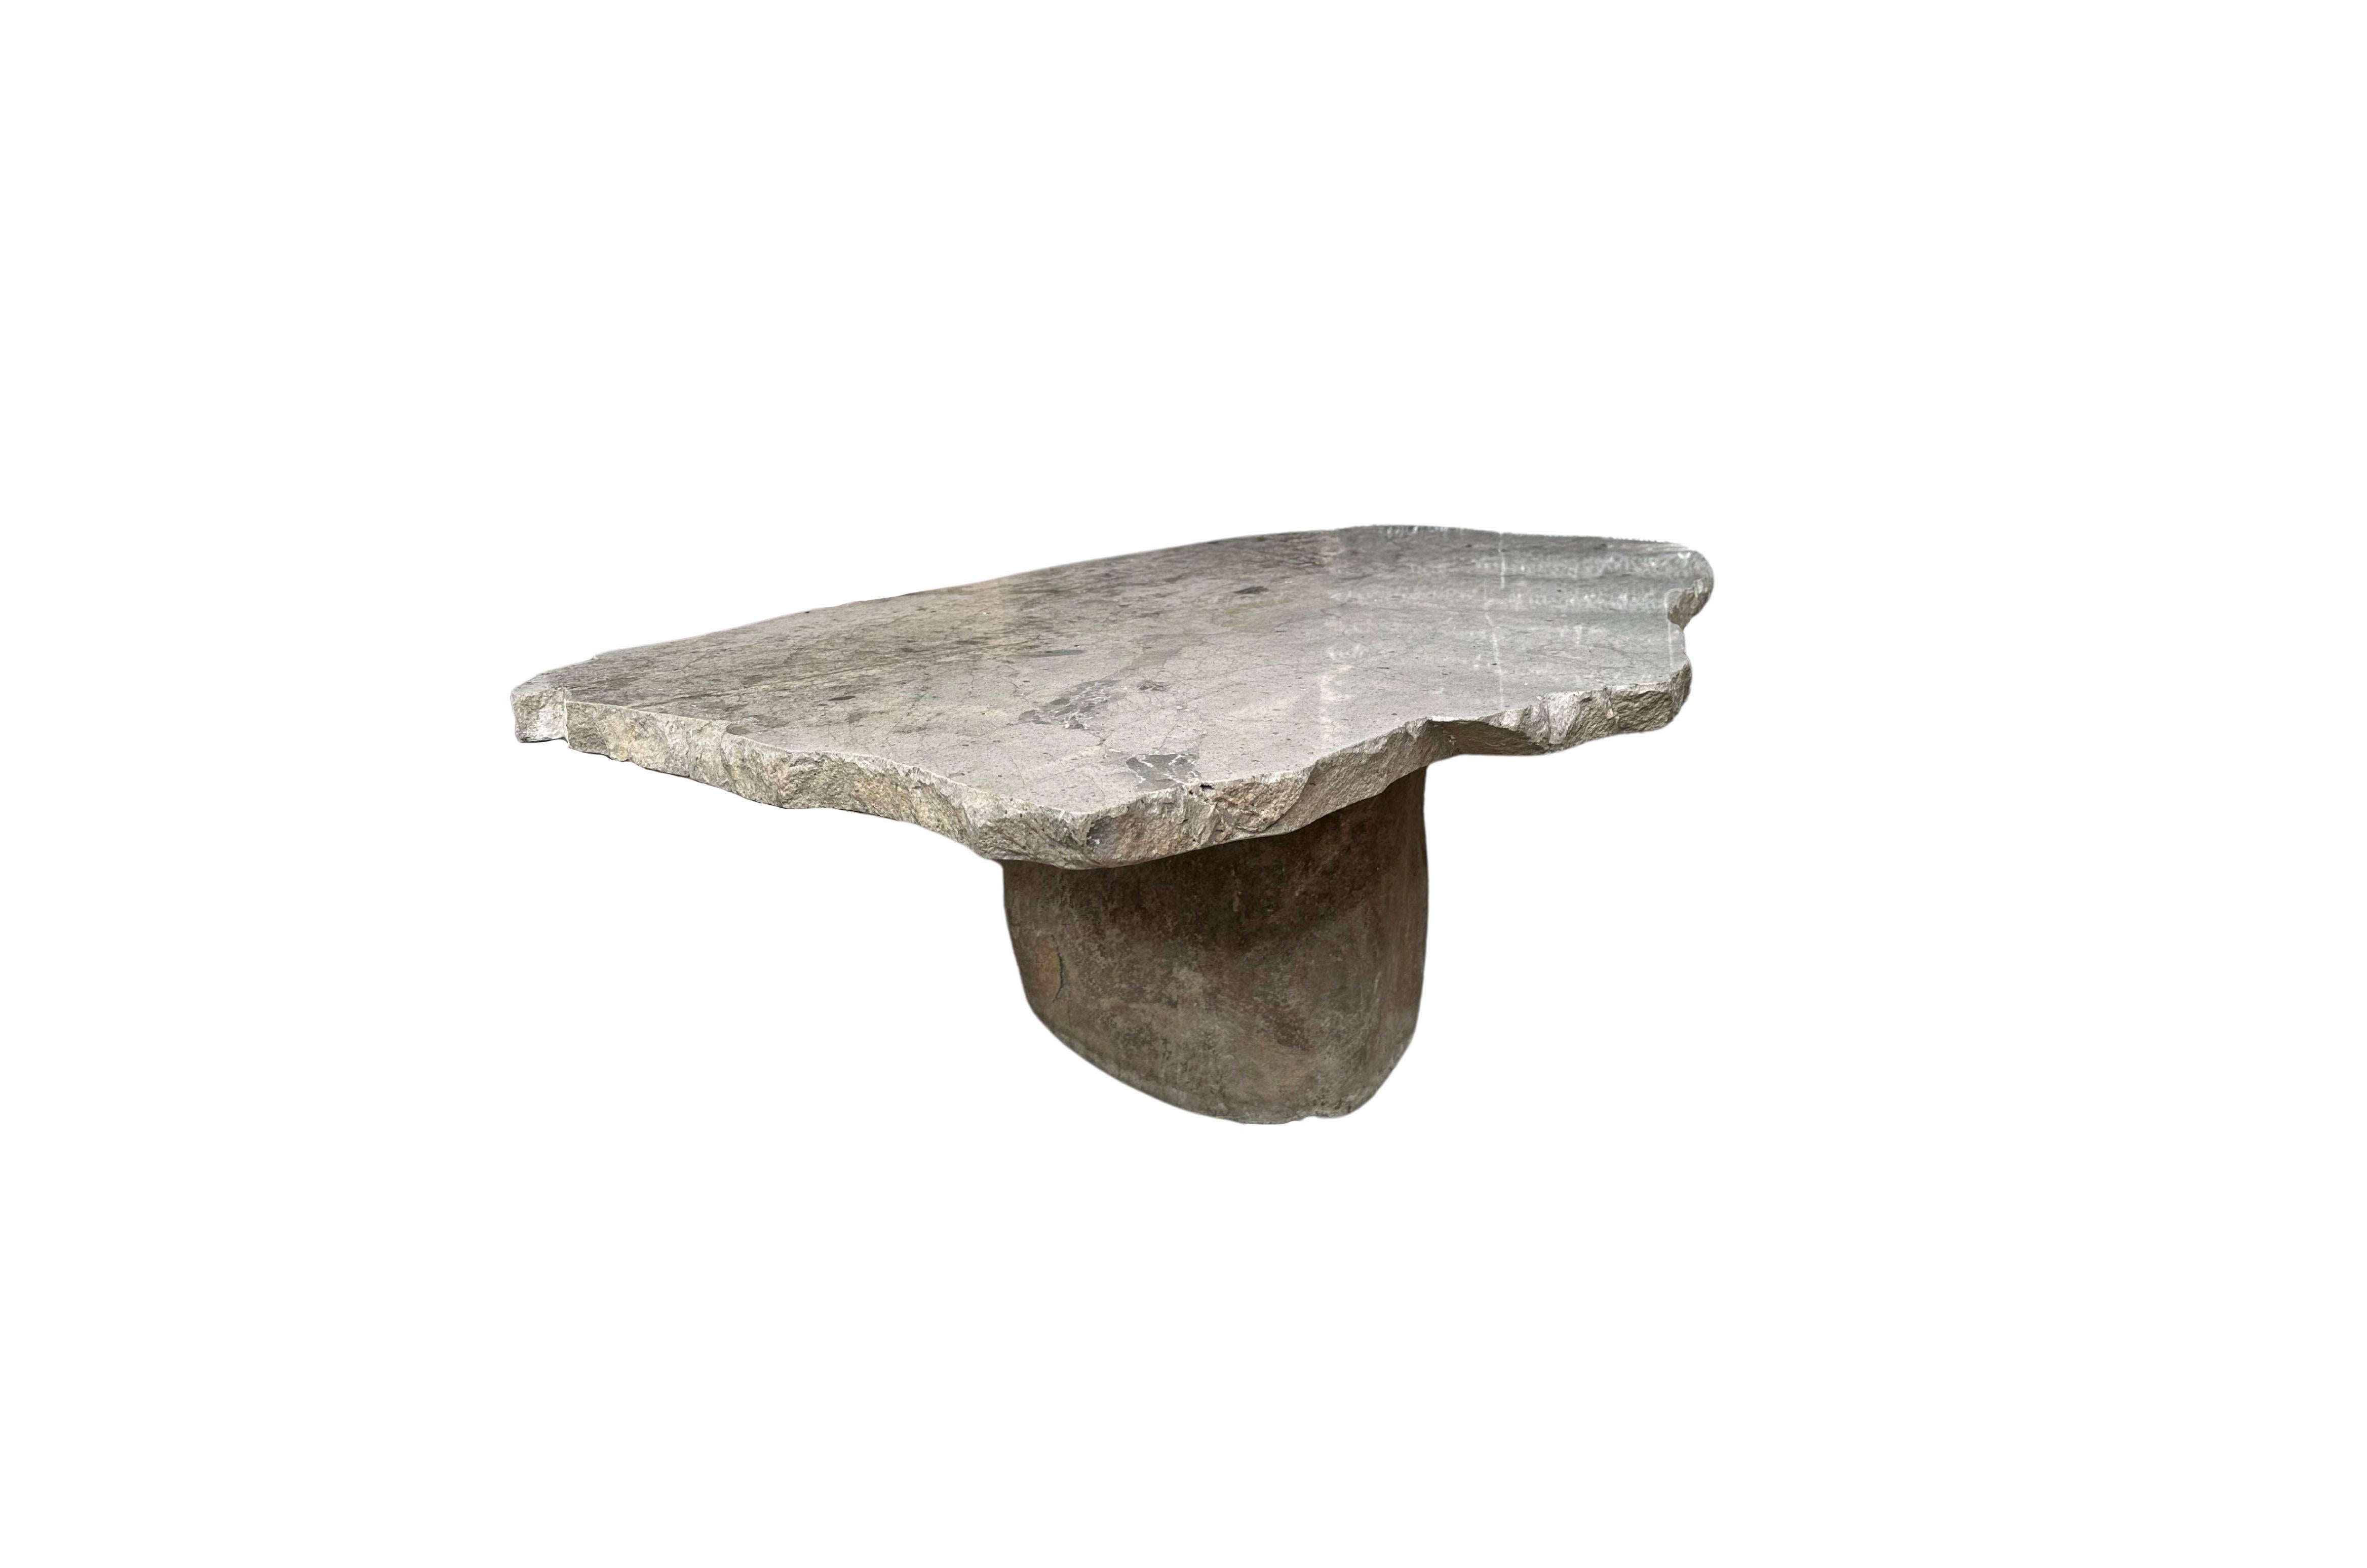 Contemporary Solid Sculptural River Stone Table from Java, Indonesia, Modern Organic